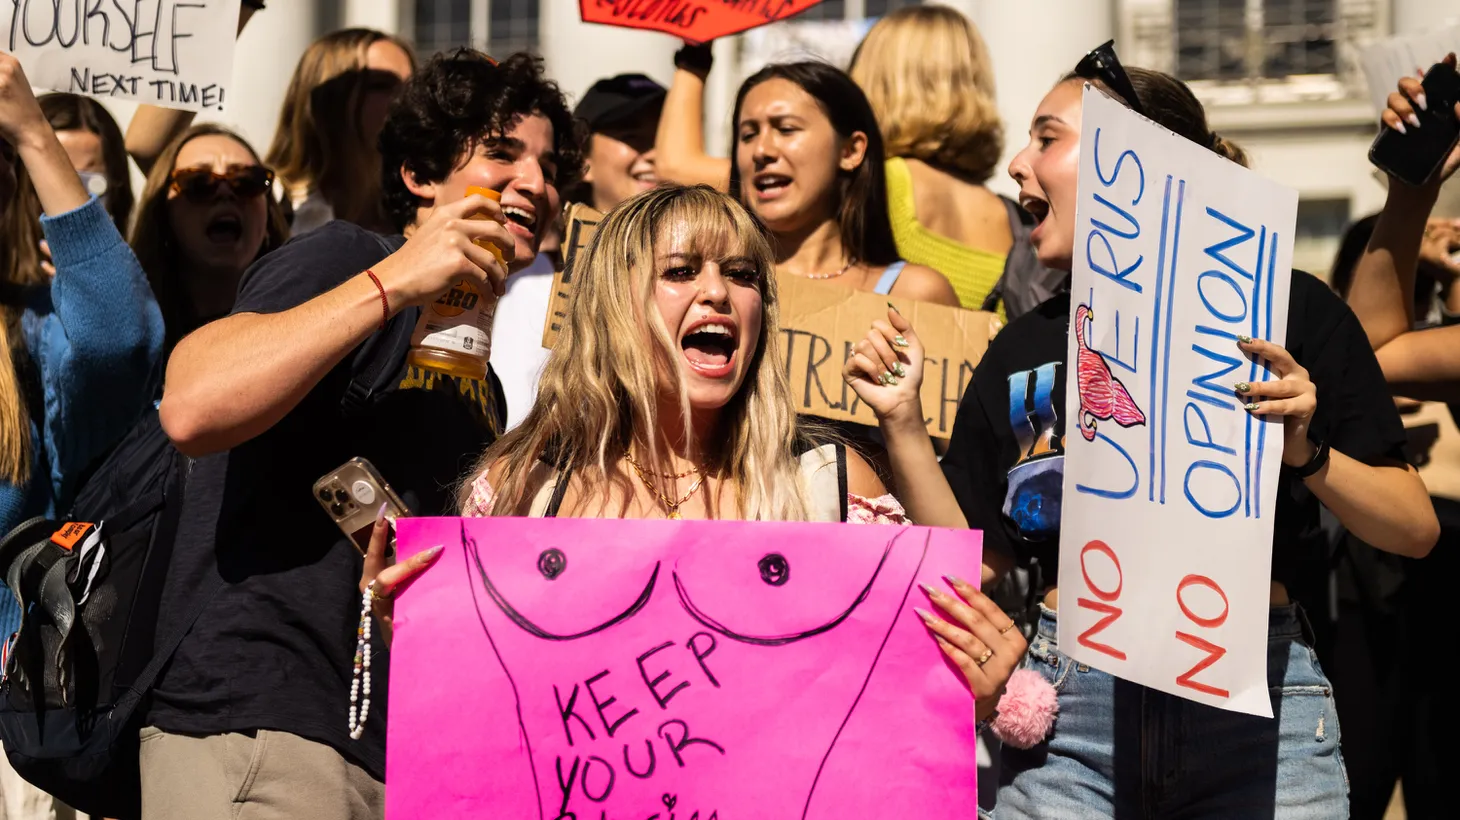 UC Berkeley students protest on campus in response to a leaked draft of the Supreme Court's opinion to overturn Roe v. Wade on May 4, 2022 in Berkeley, CA.